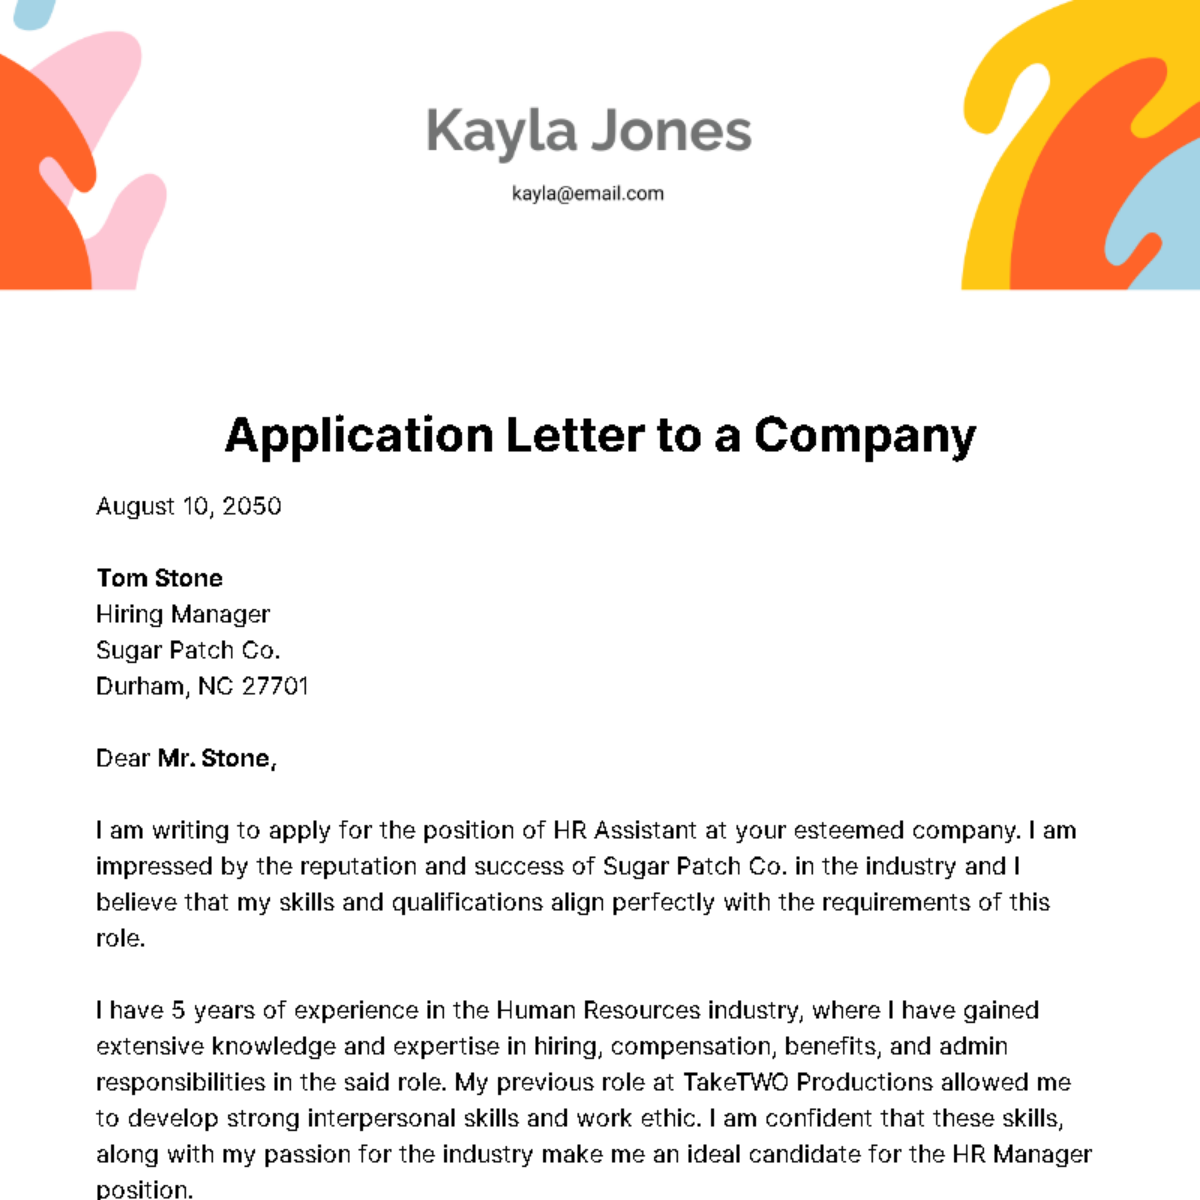 Application Letter to a Company Template